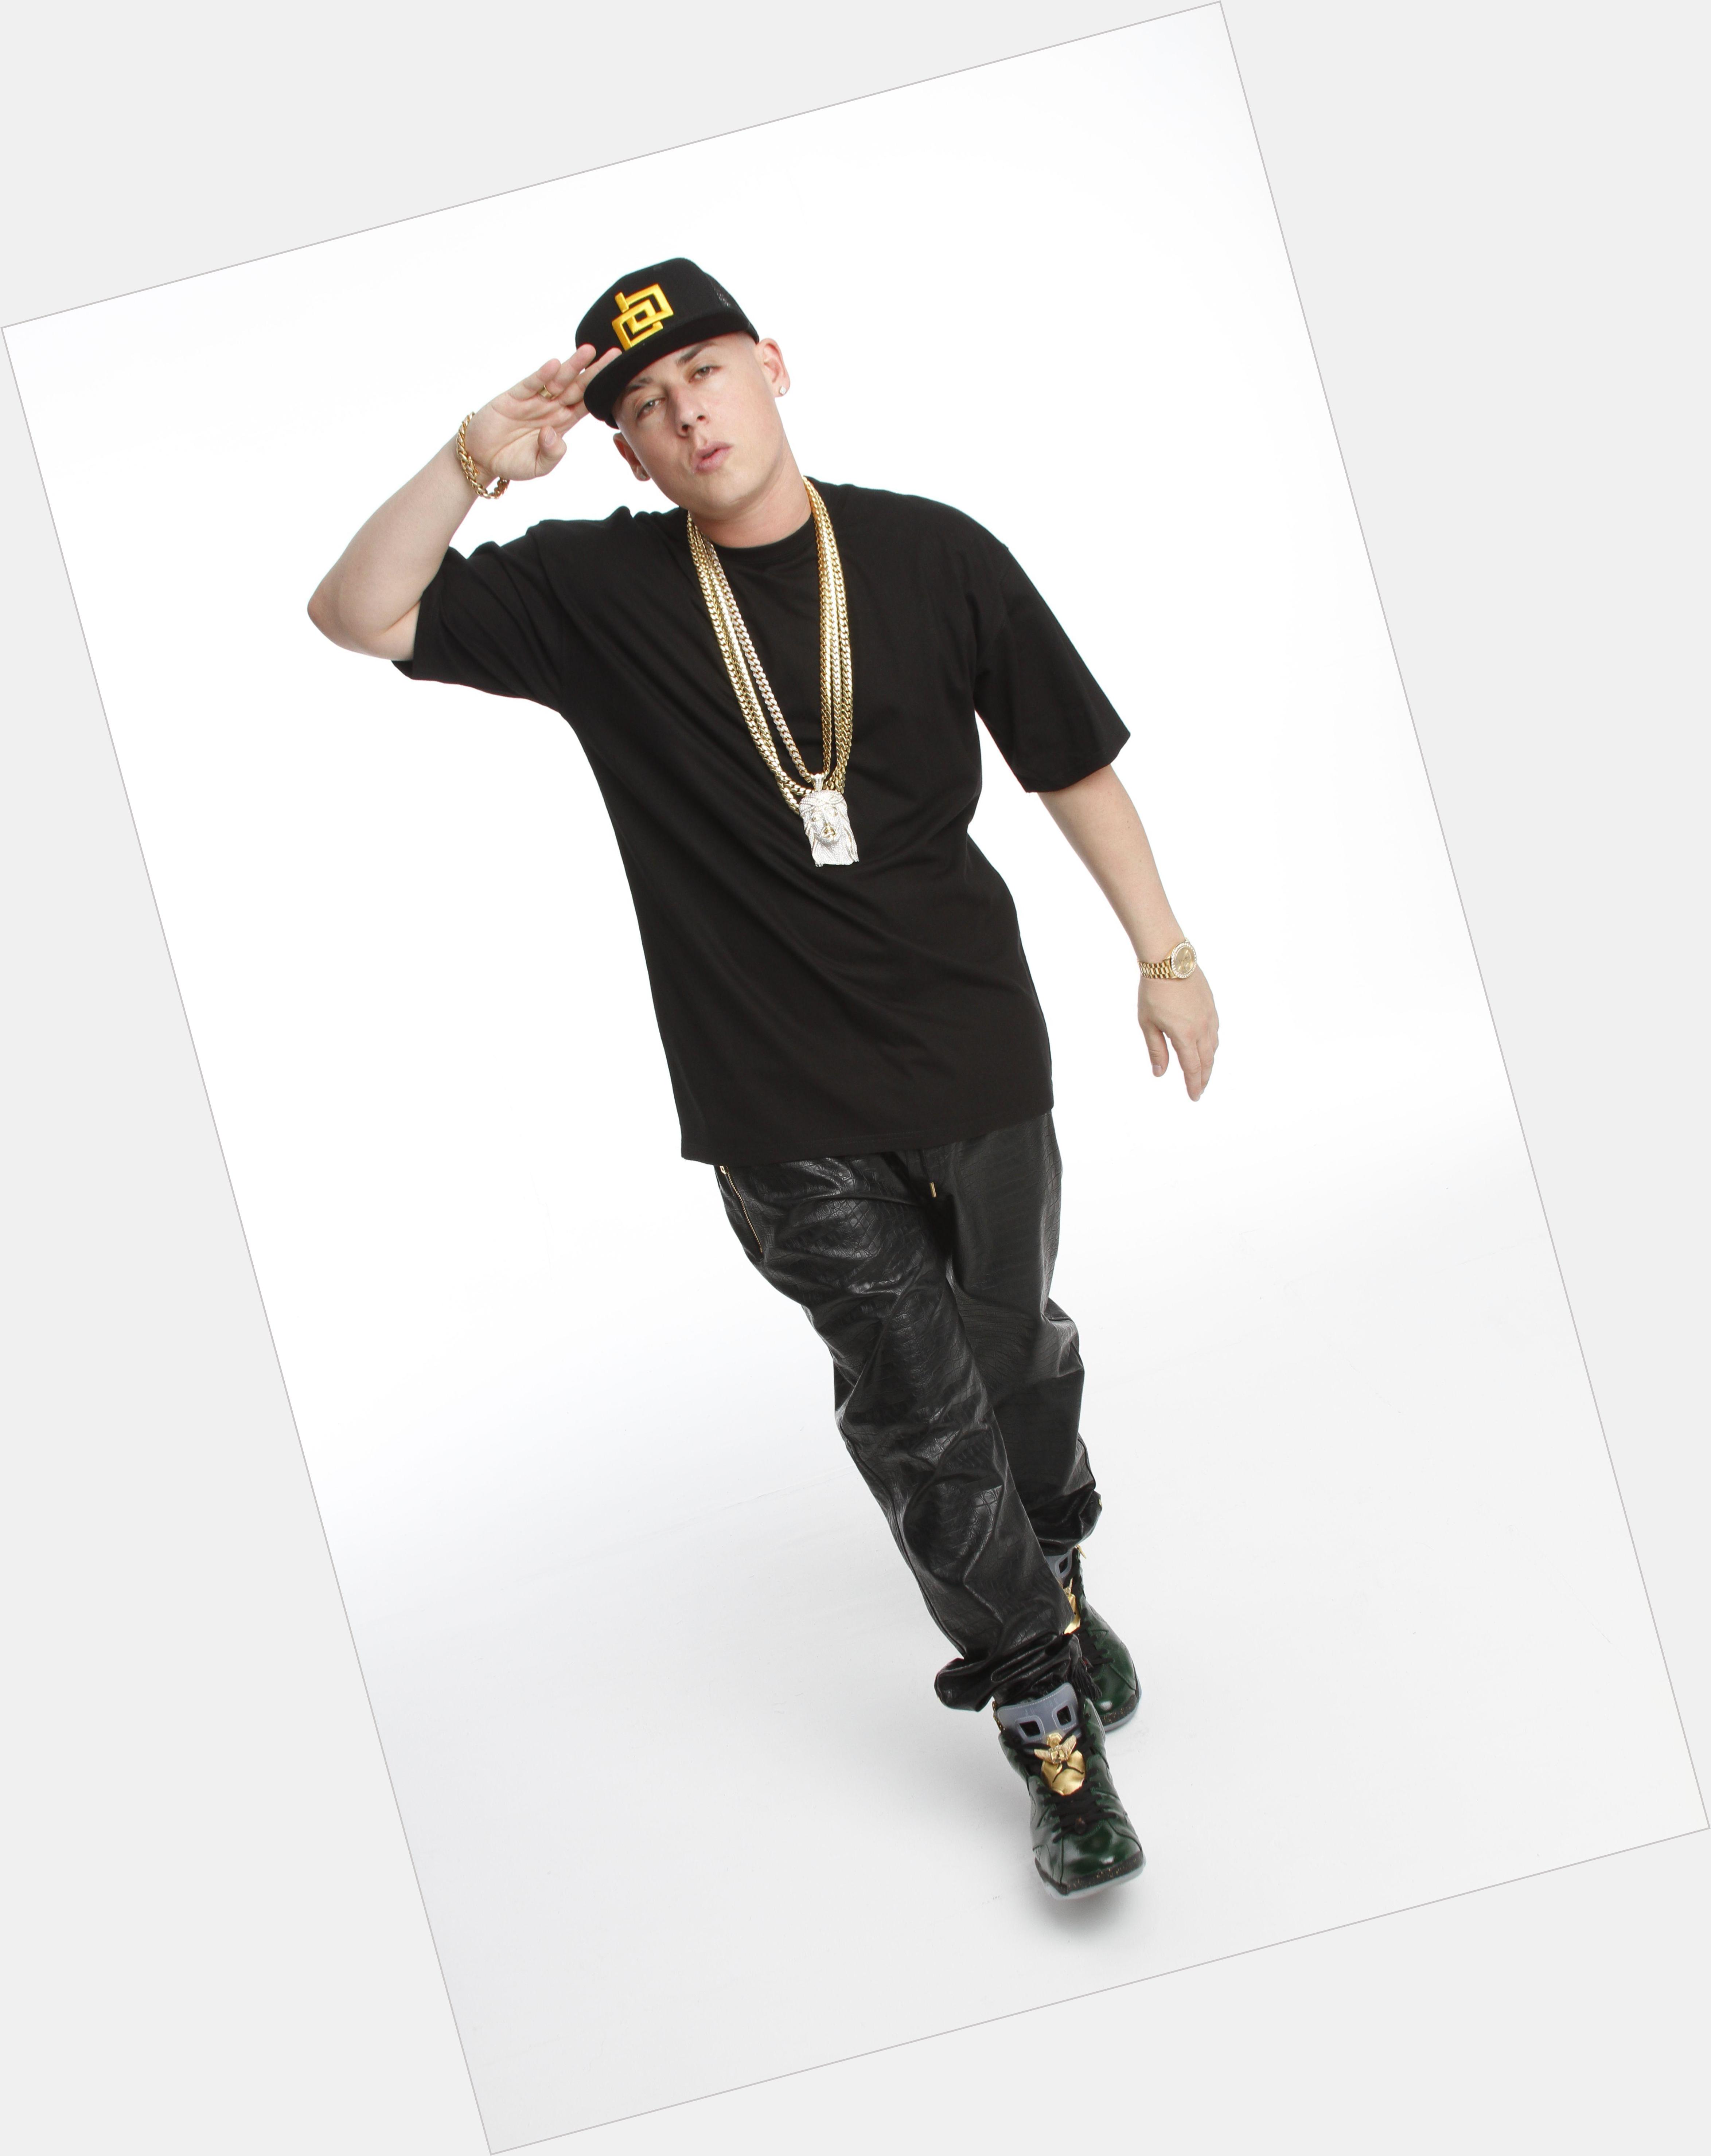 Cosculluela marriage 3